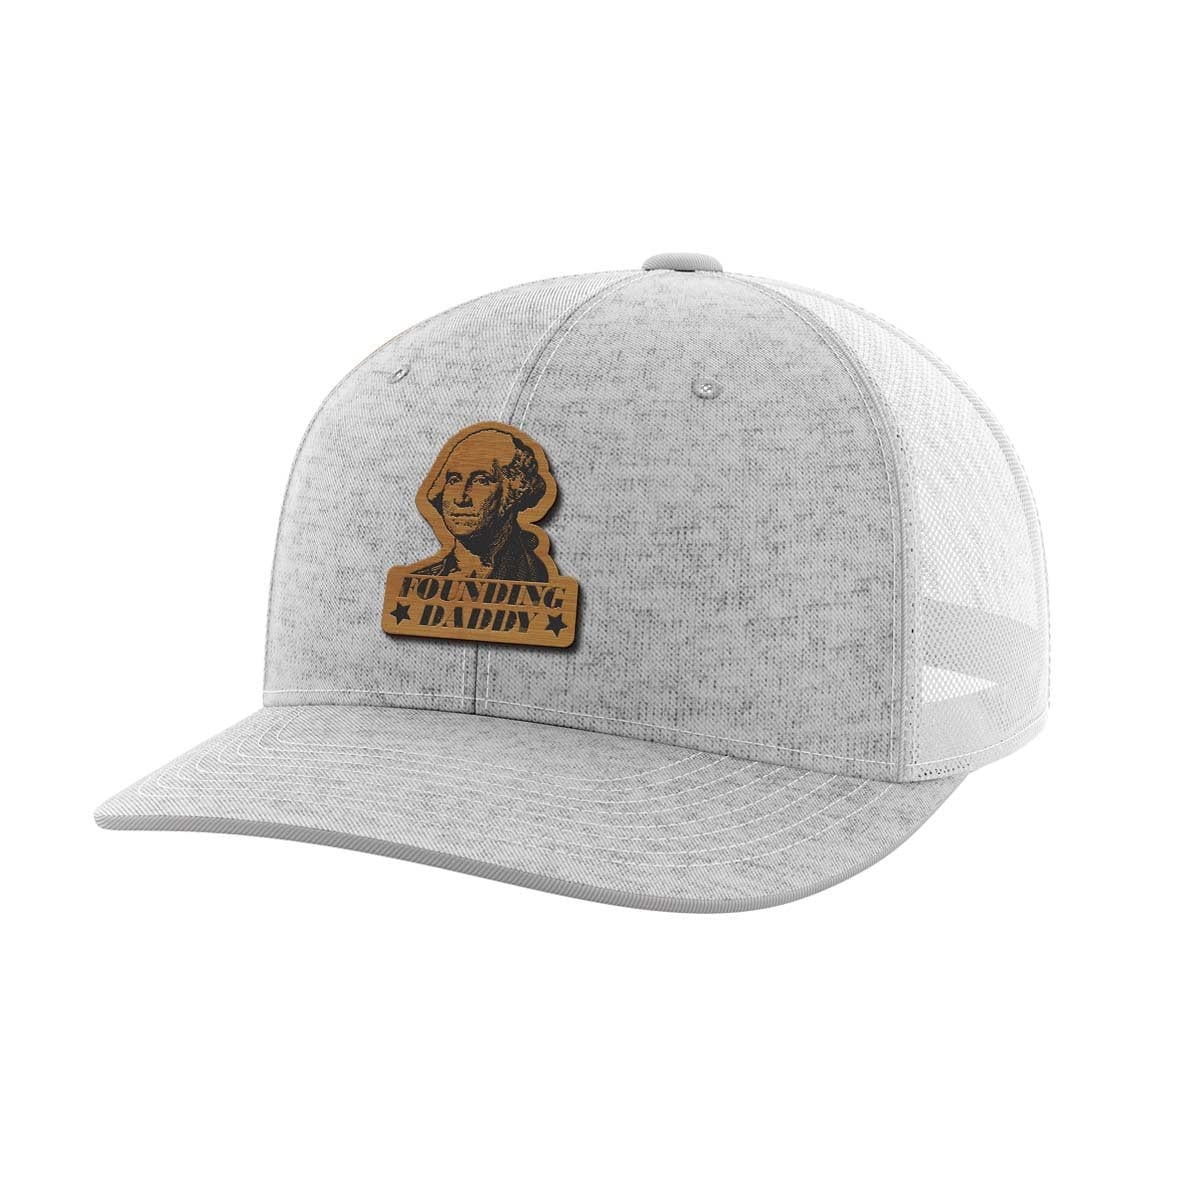 Founding Daddy Bamboo Patch Hat - Greater Half